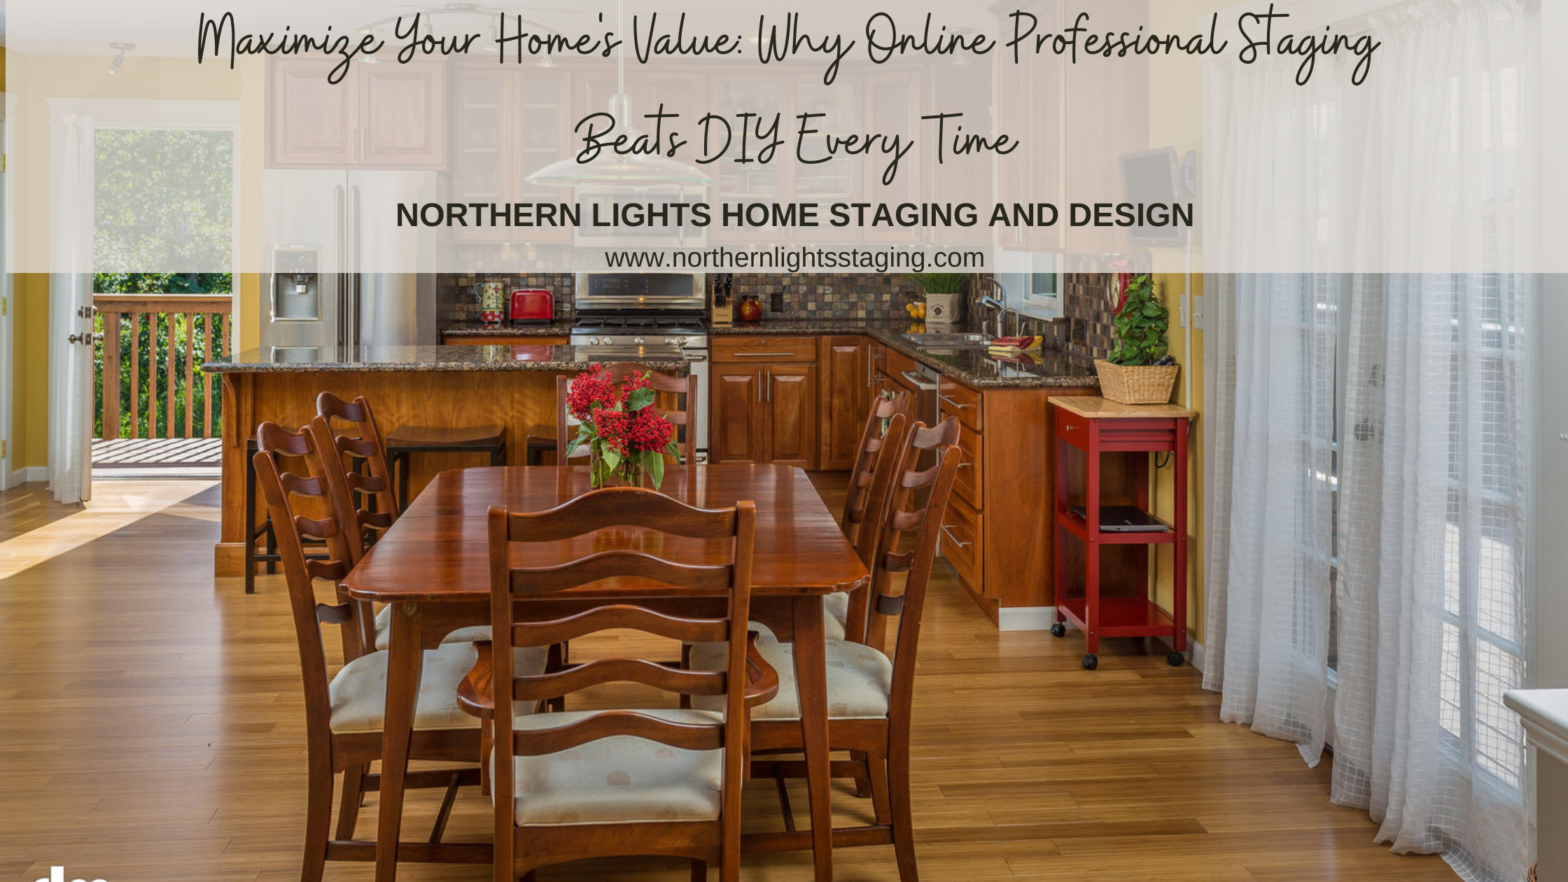 Maximize Your Home's Value: Why Online Professional Staging